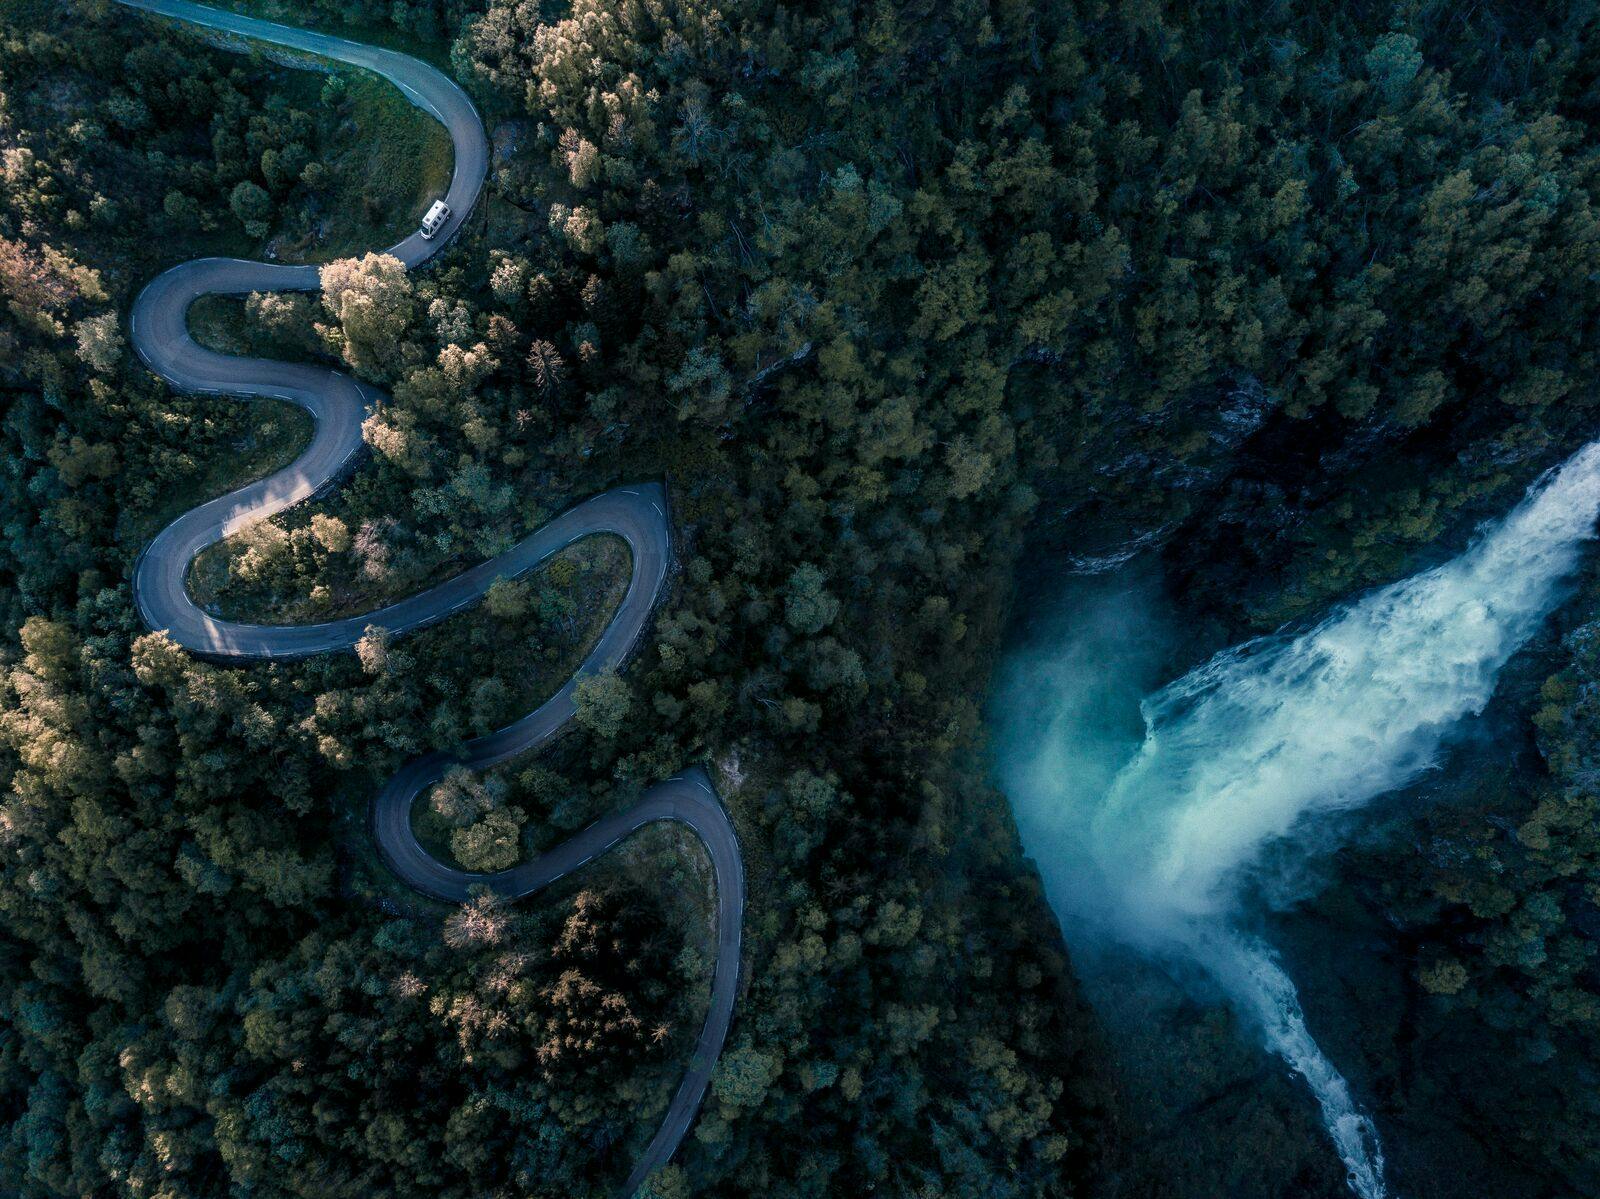 The hairpin bends at Stalheim with waterfall on the side of the road